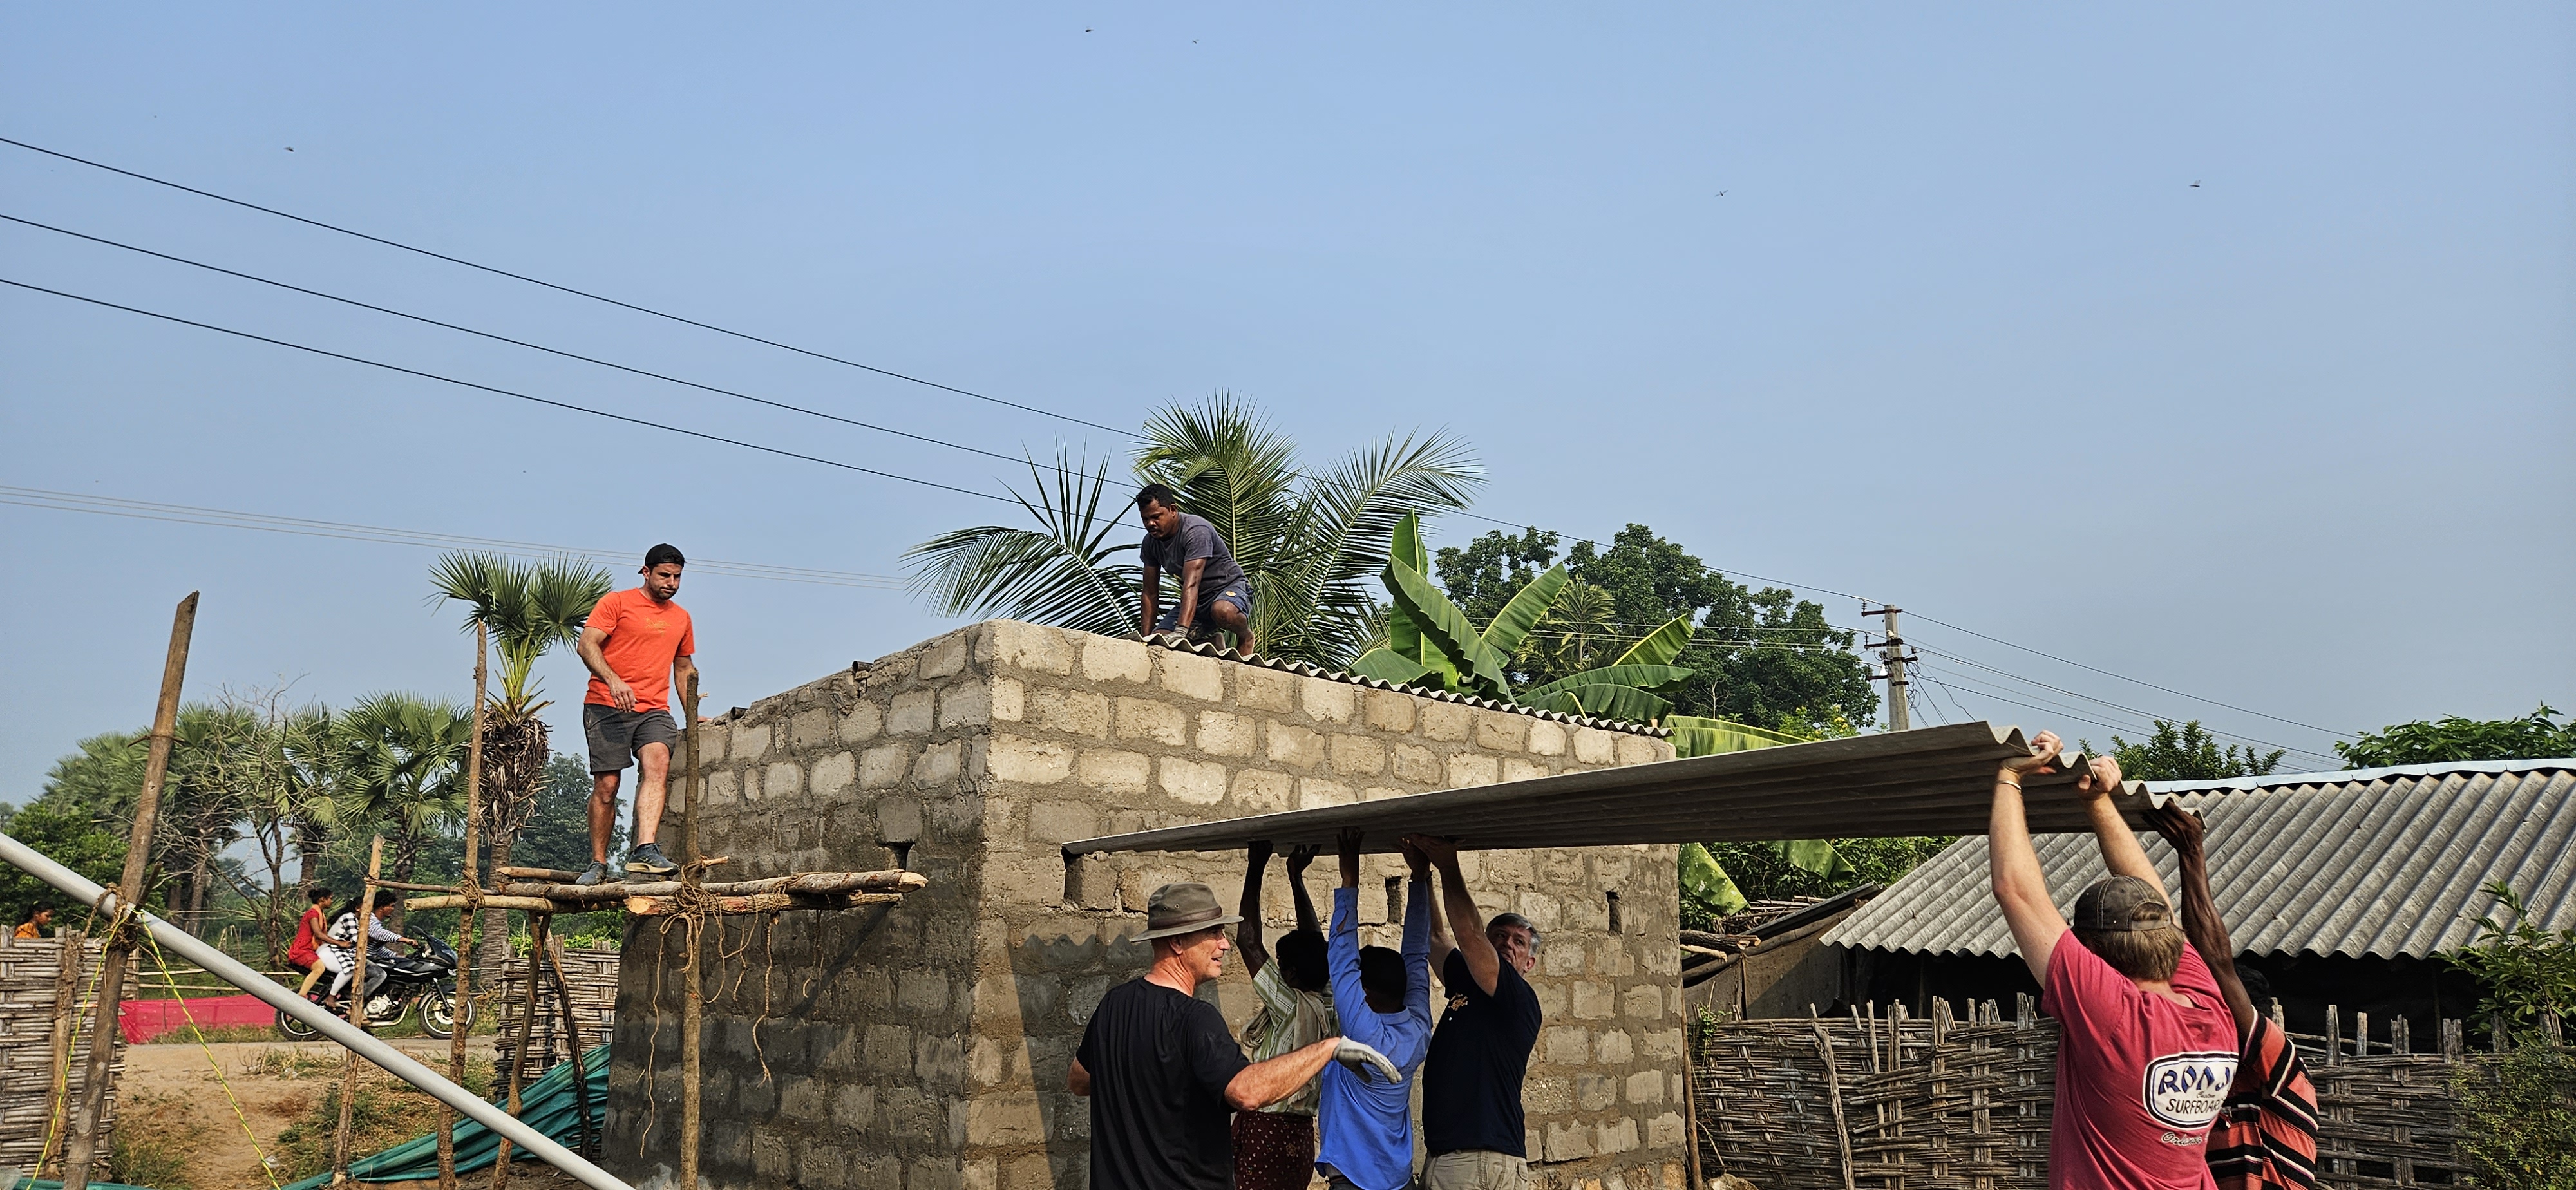 Image of Aasha volunteers lifting the last piece of roofing material to the top of the building that houses the water filtration system they installed.